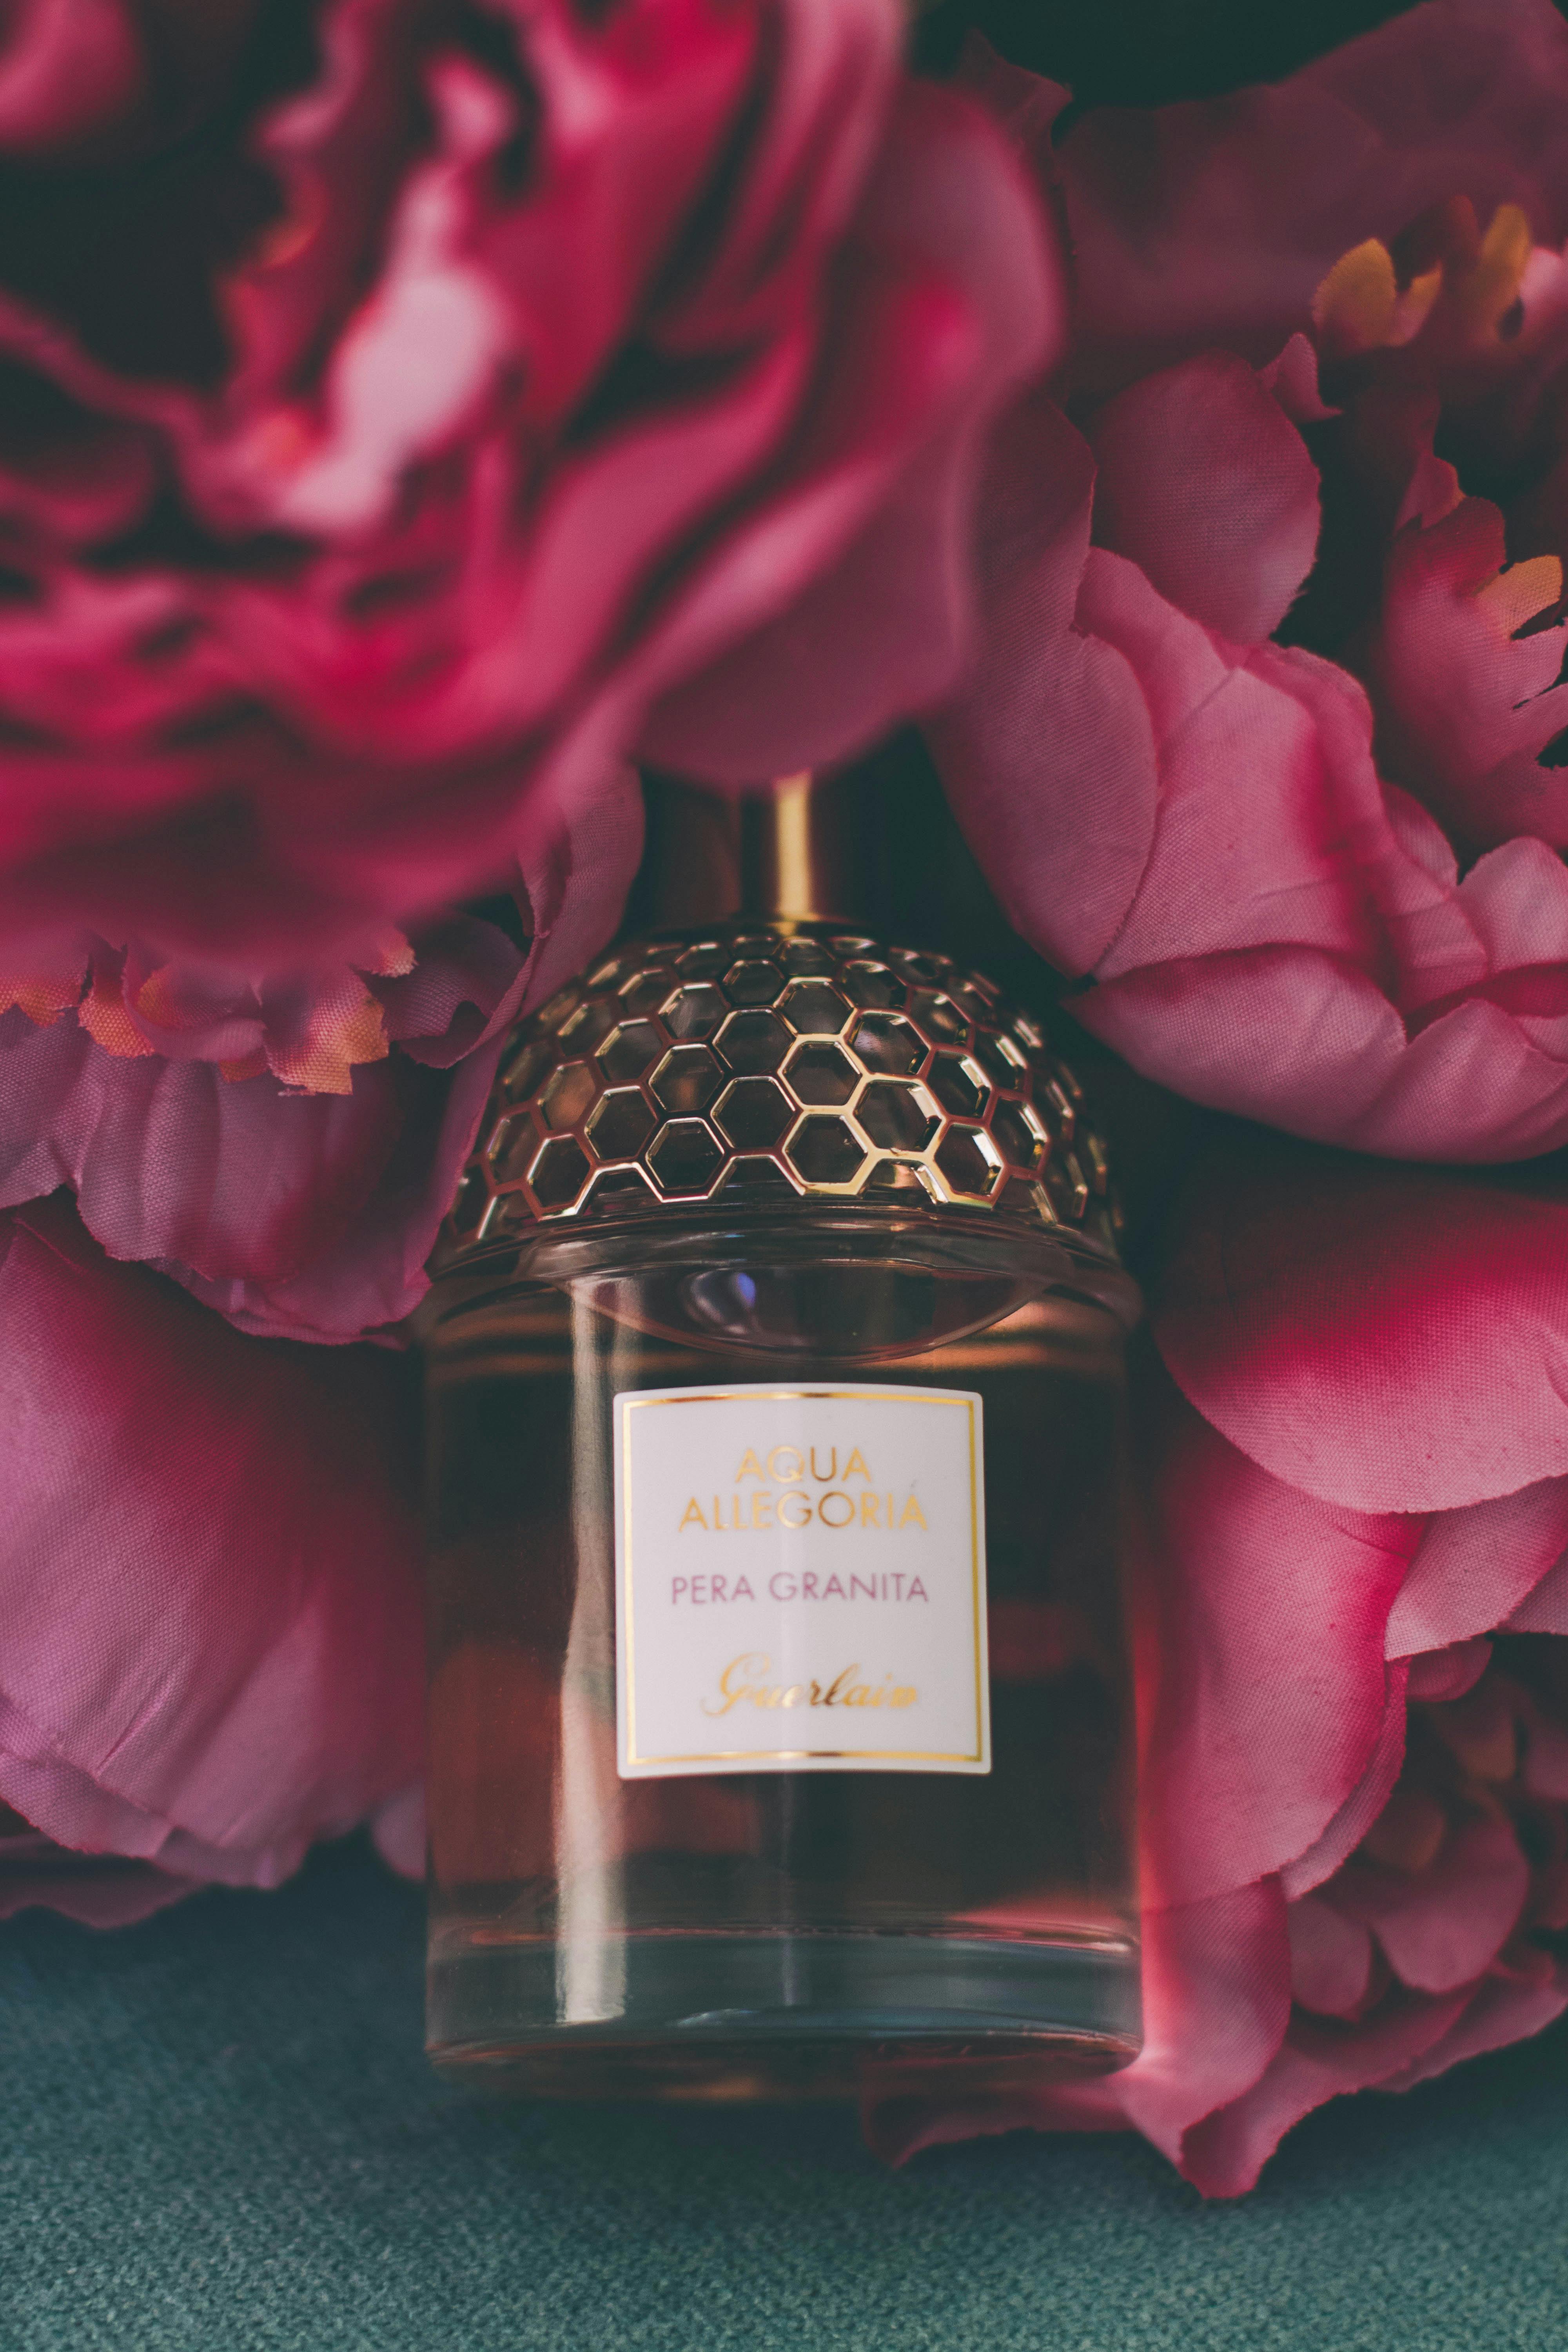 Perfume Bottle Surrounded by Flowers · Free Stock Photo